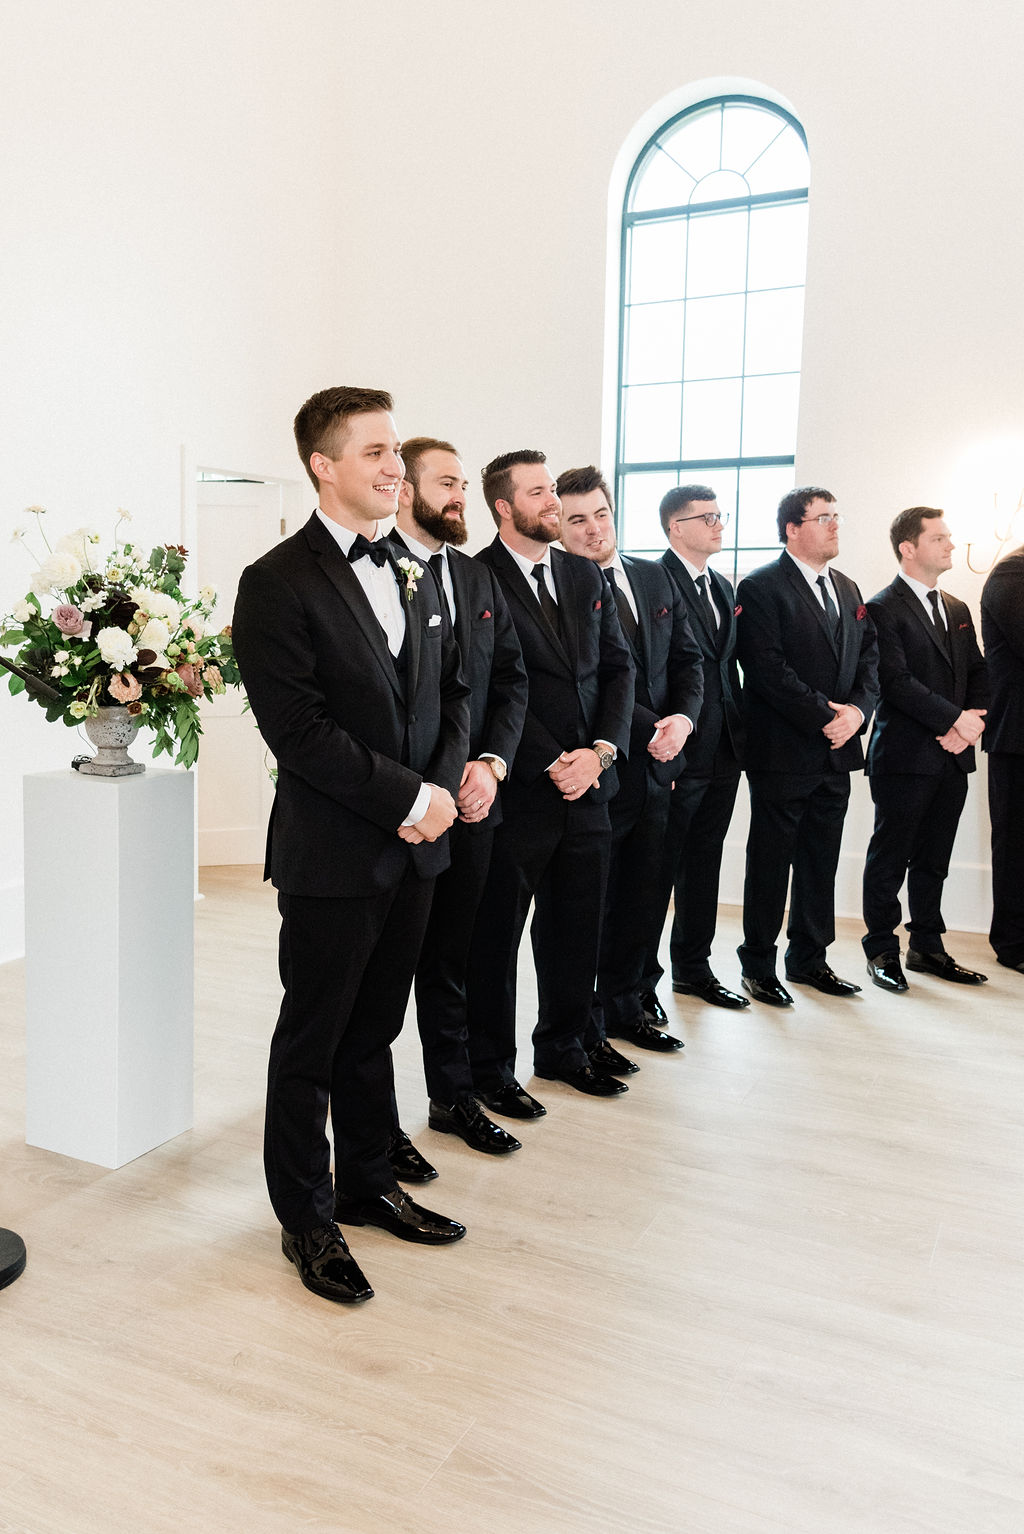 Groom and groomsmen smiling during a wedding